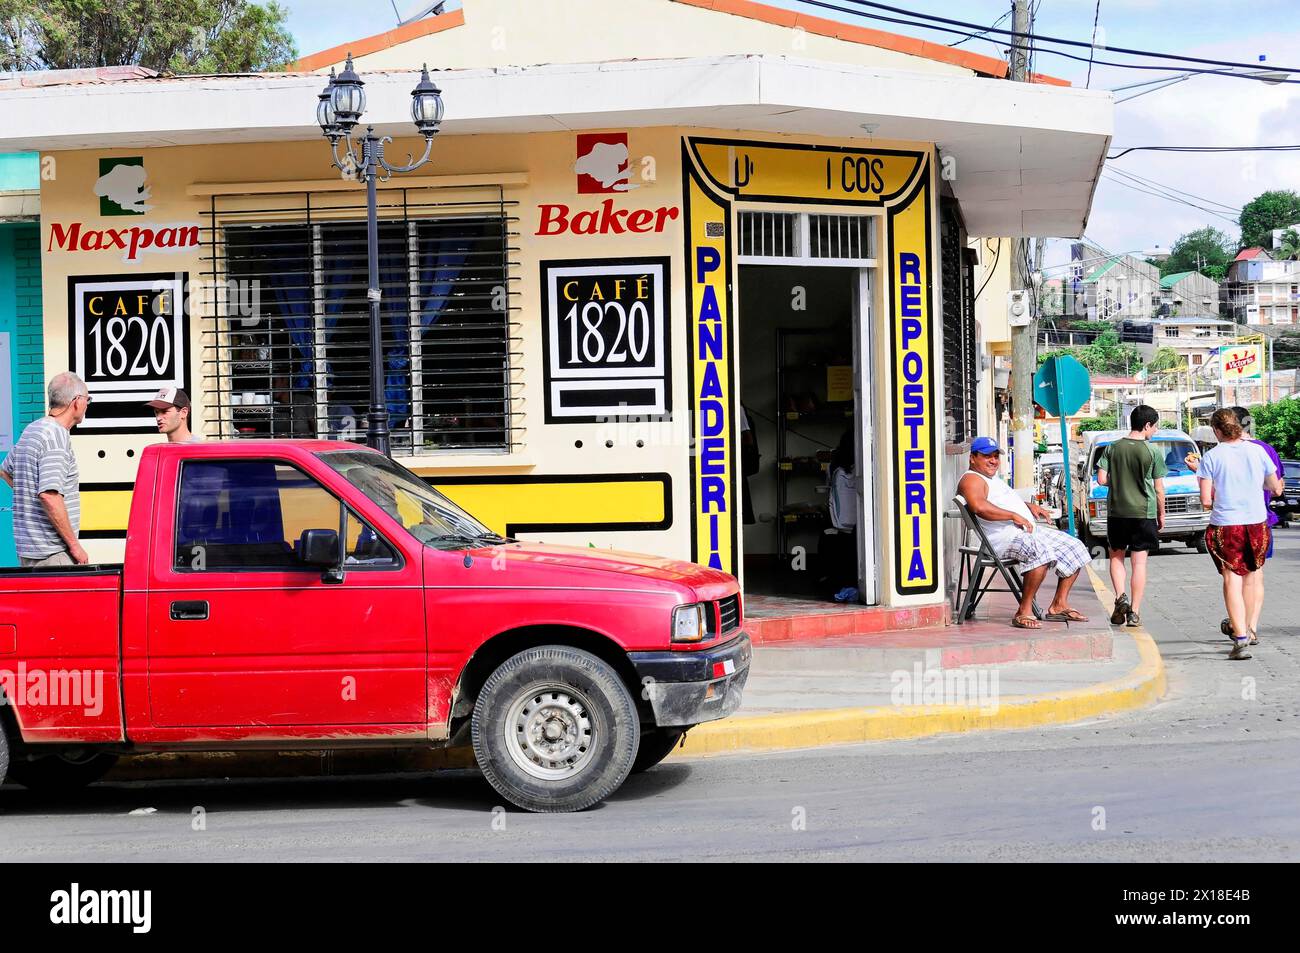 San Juan del Sur, Nicaragua, Bakery and cafe on a busy street corner with people walking by, Central America, Central America Stock Photo